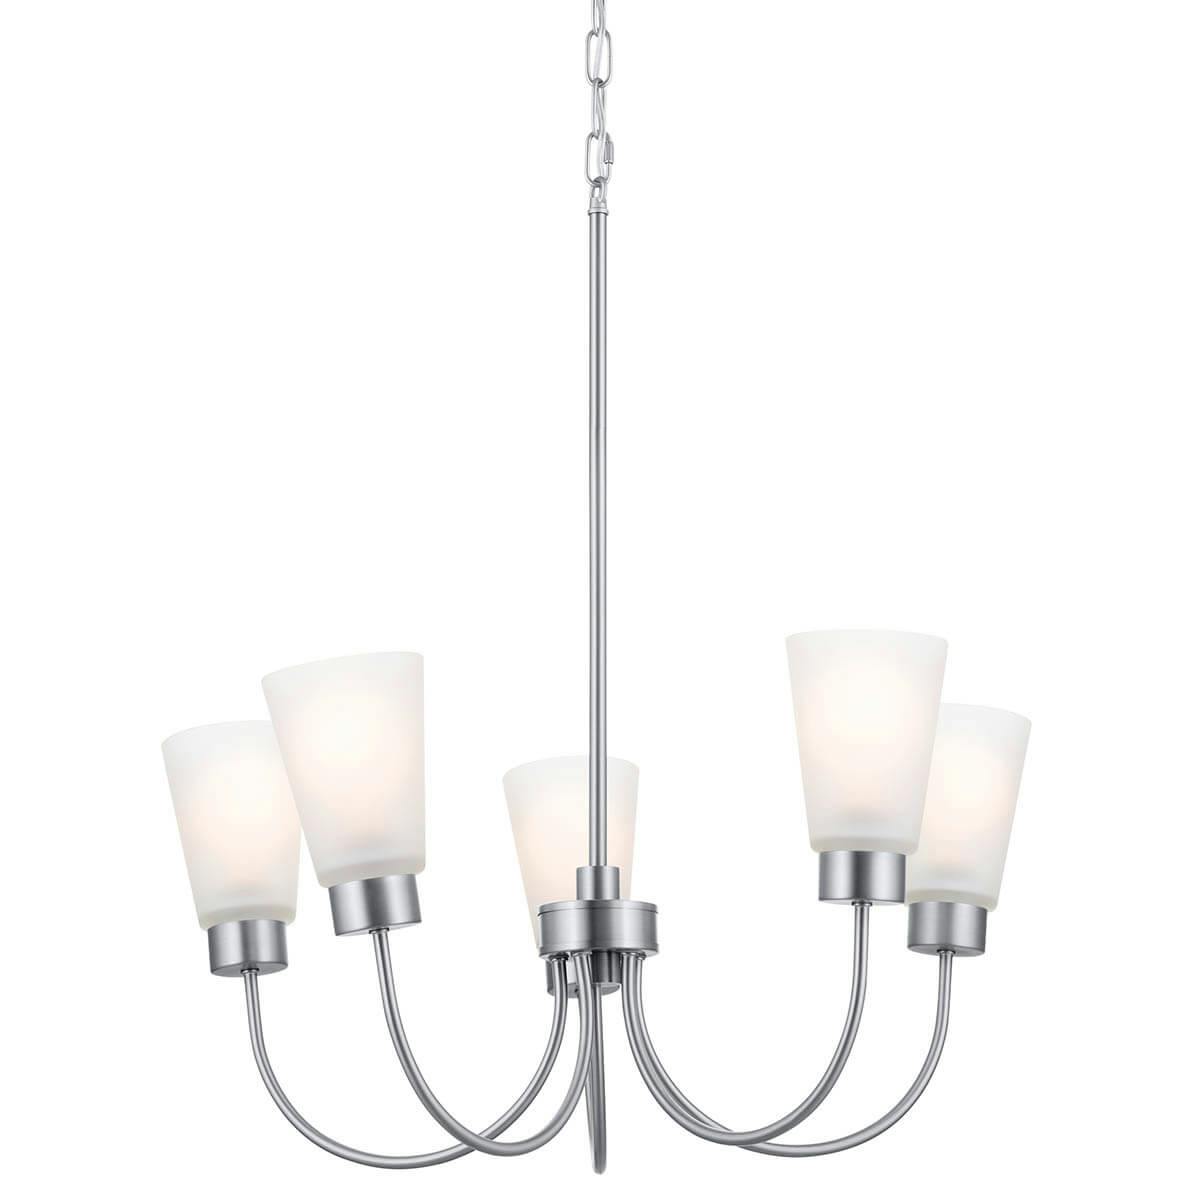 Erma 24"  Chandelier Brushed Nickel without the canopy on a white background